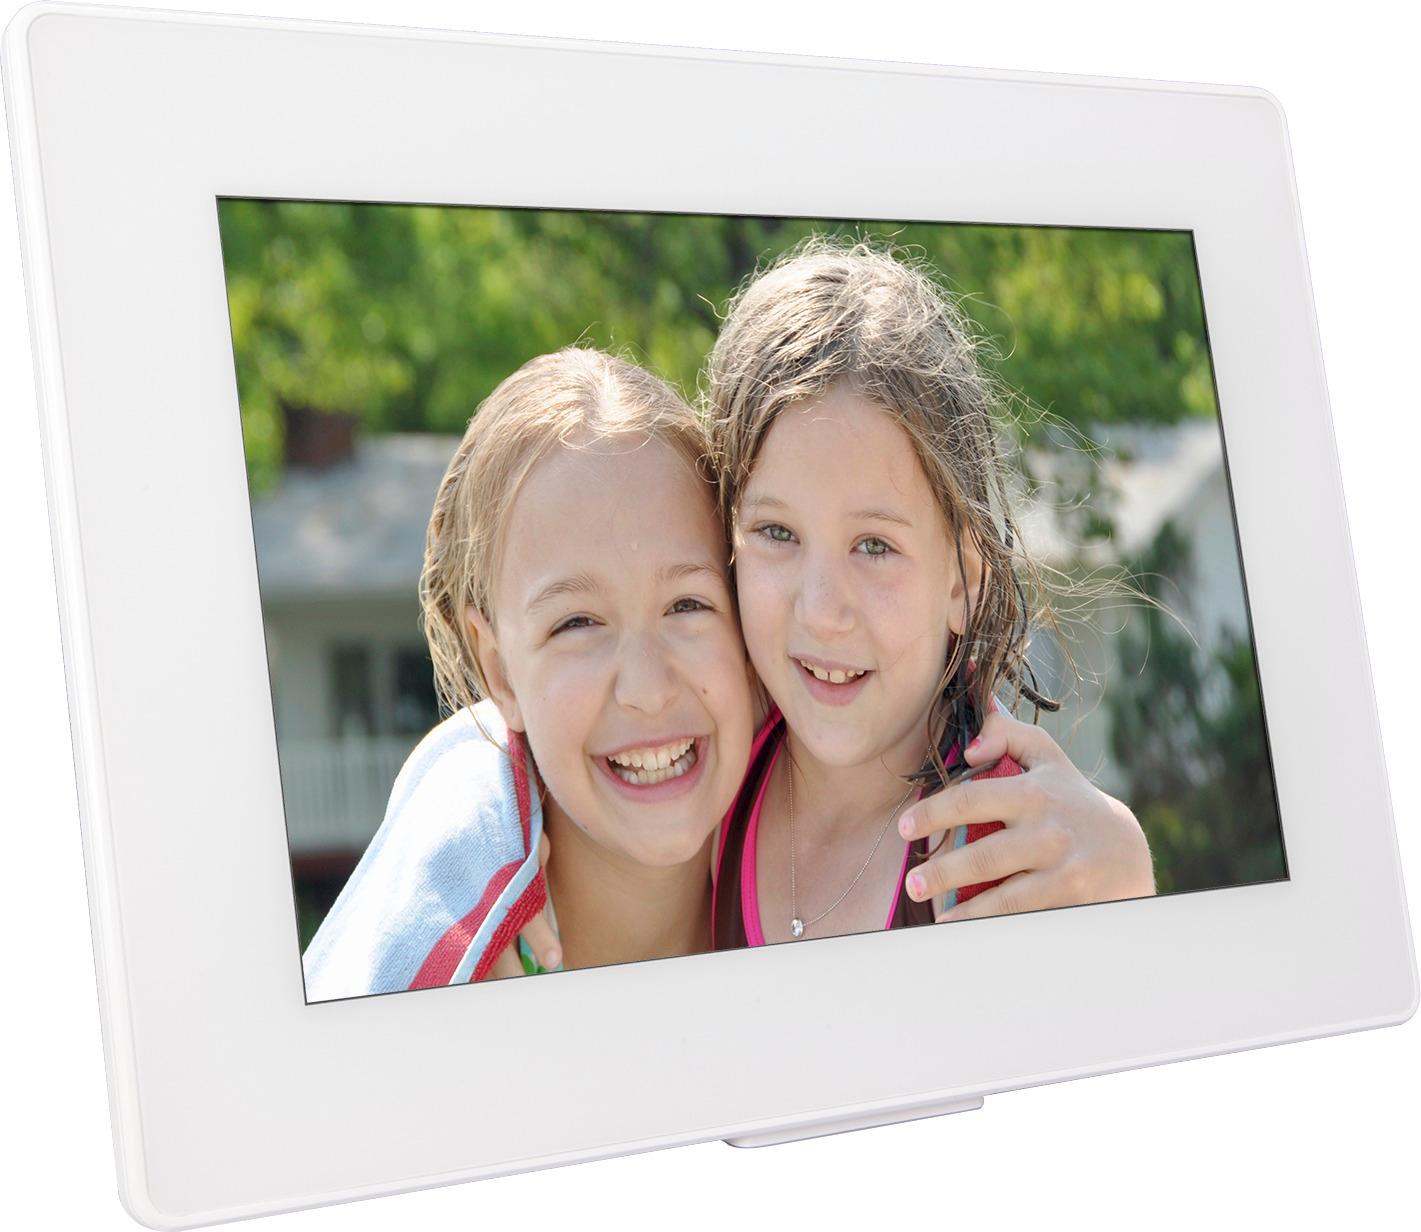 Angle View: PhotoSpring - 10.1" LCD Wi-Fi Digital Photo Frame with 16GB Memory